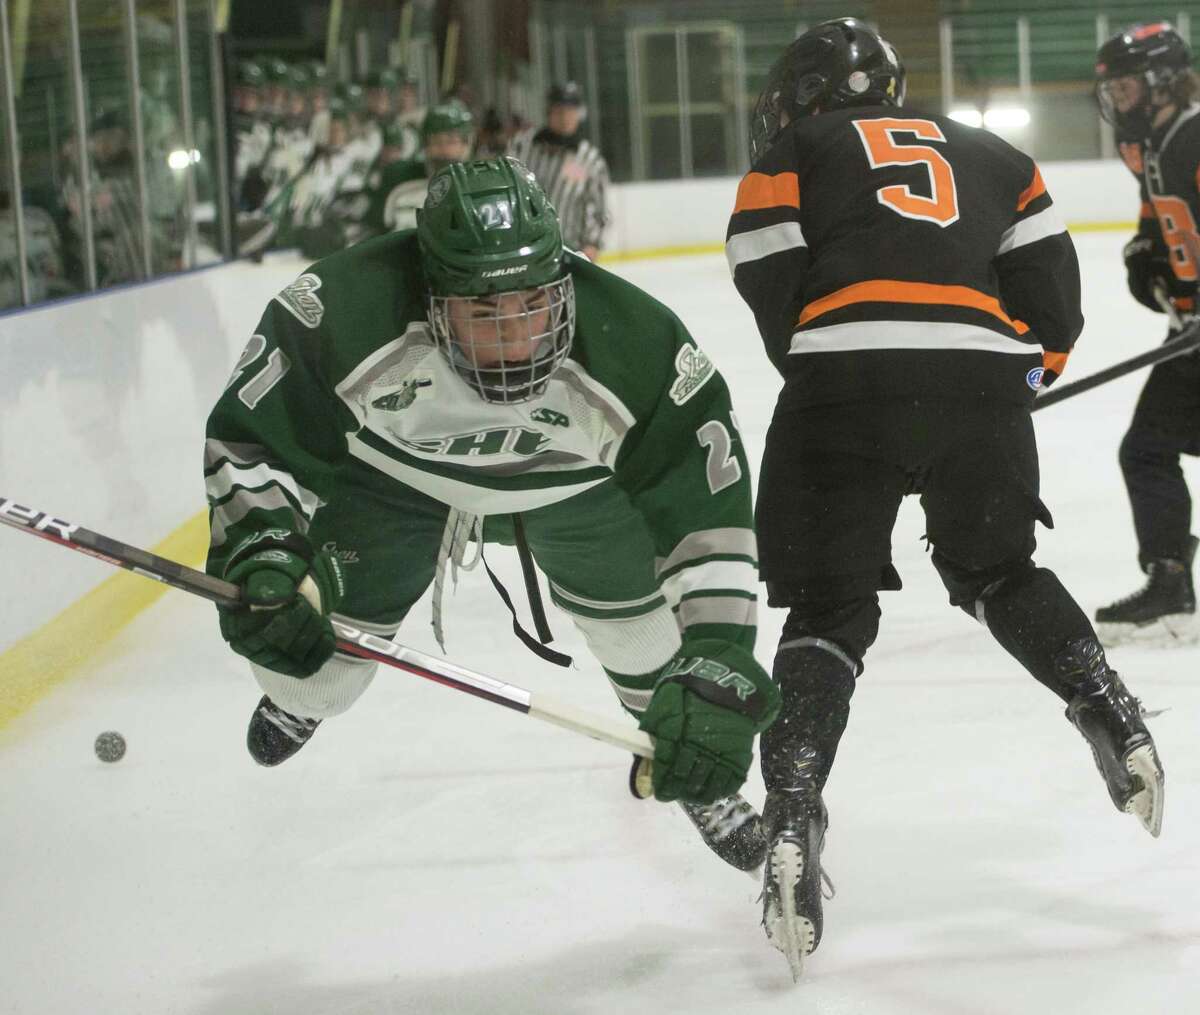 Shen forward Nolan Sullivan and Bethlehem forward William Bievenue collide during a game on Wednesday, Jan. 19, 2022, in Clifton Park, N.Y. (Jenn March, Special to the Times Union)